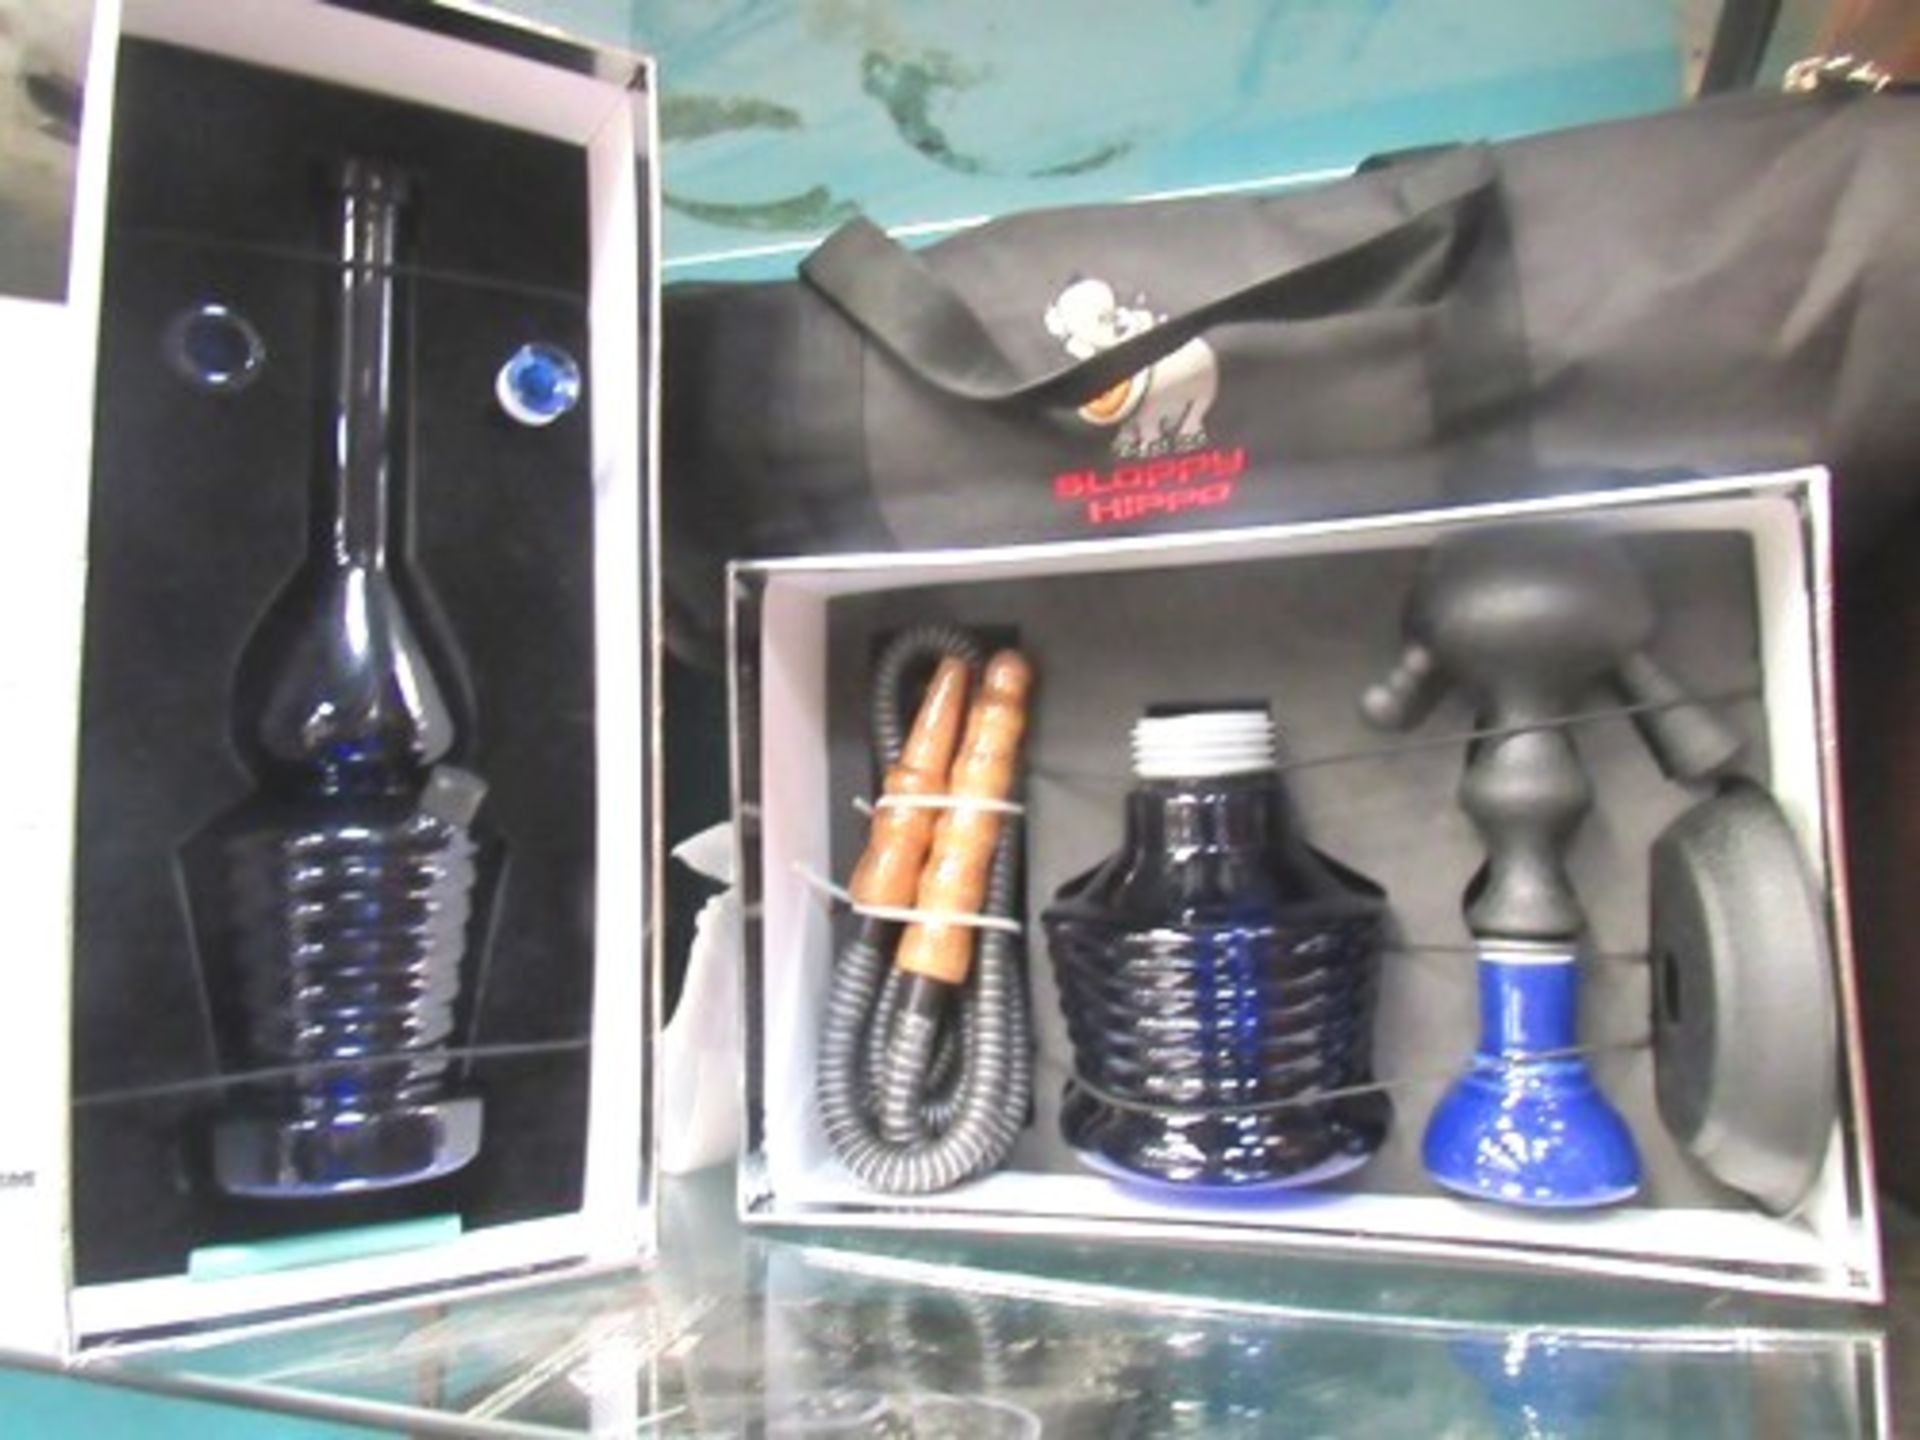 1 x Sloppy Hippo Bristol blue glass hookah pipe with carry case - New in box (C7B)